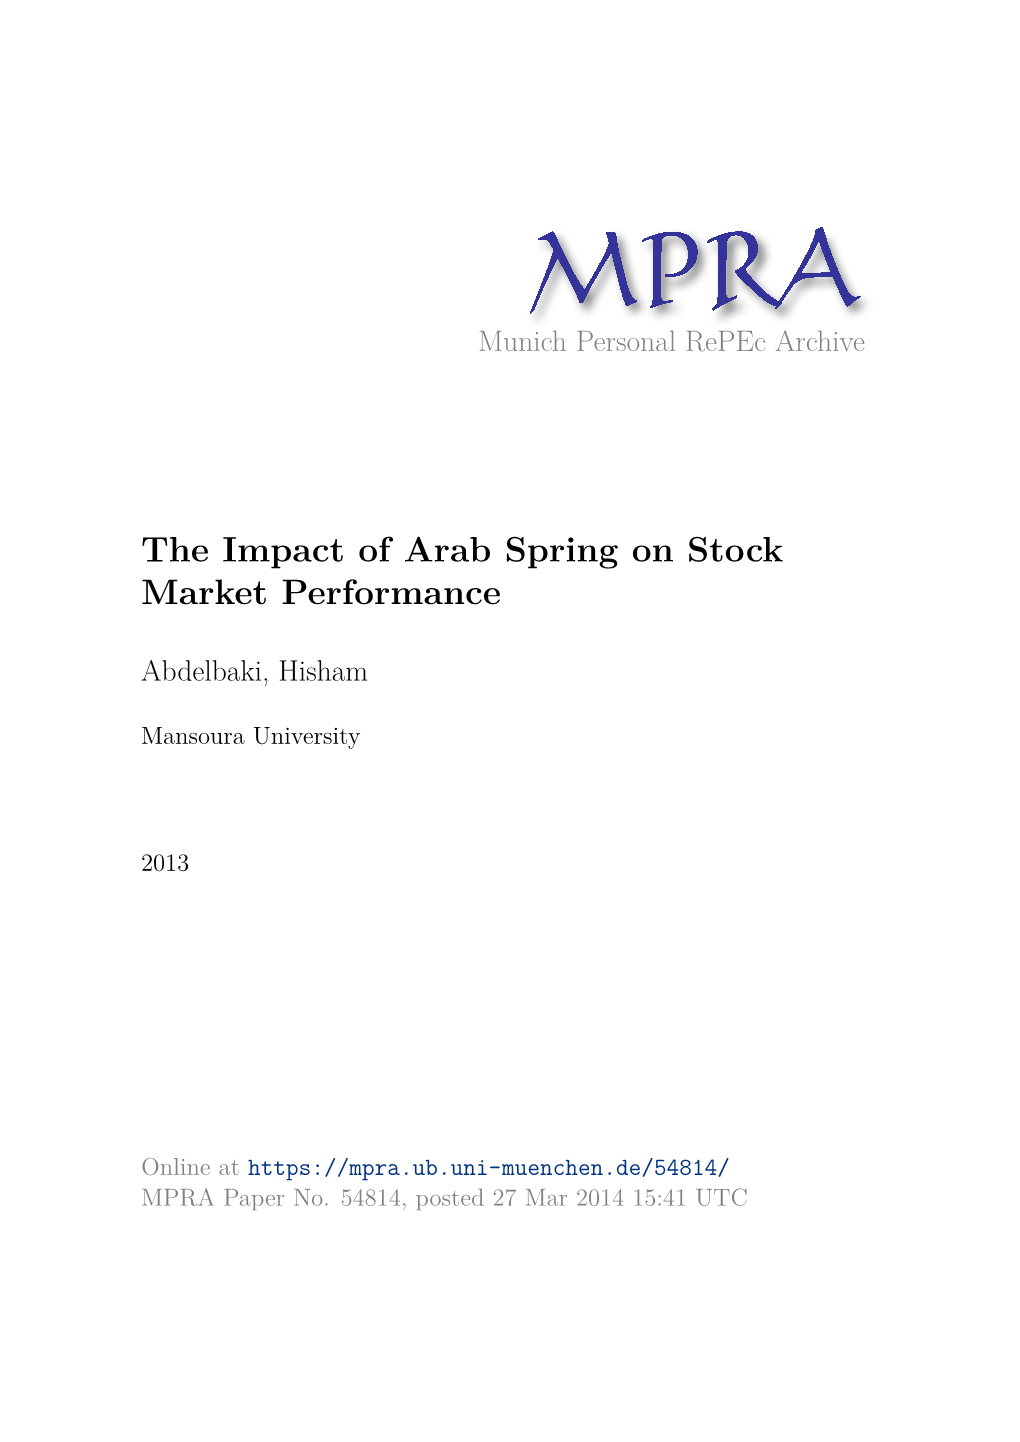 The Impact of Arab Spring on Stock Market Performance